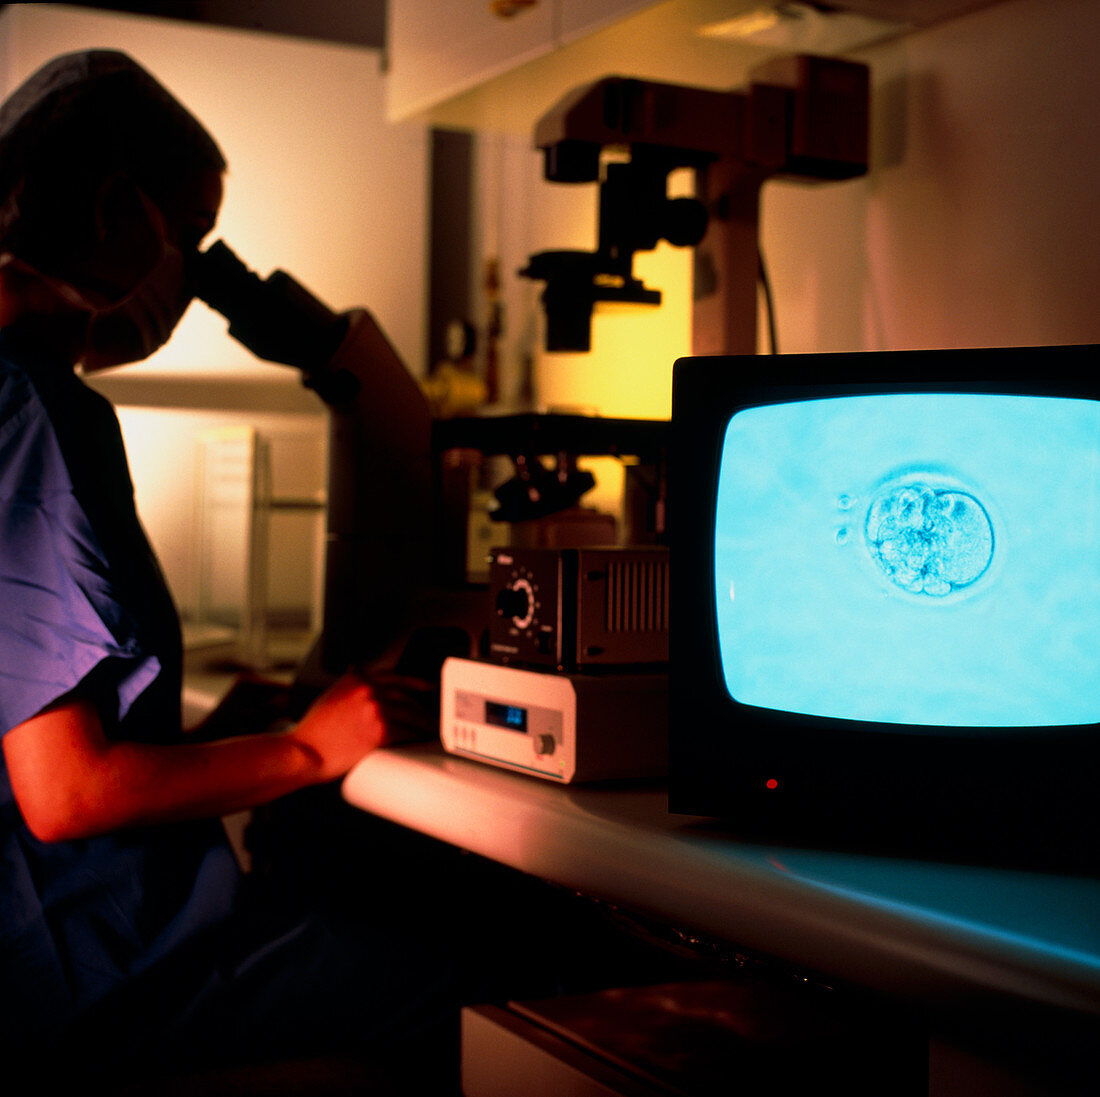 Technician studying early embryo after IVF